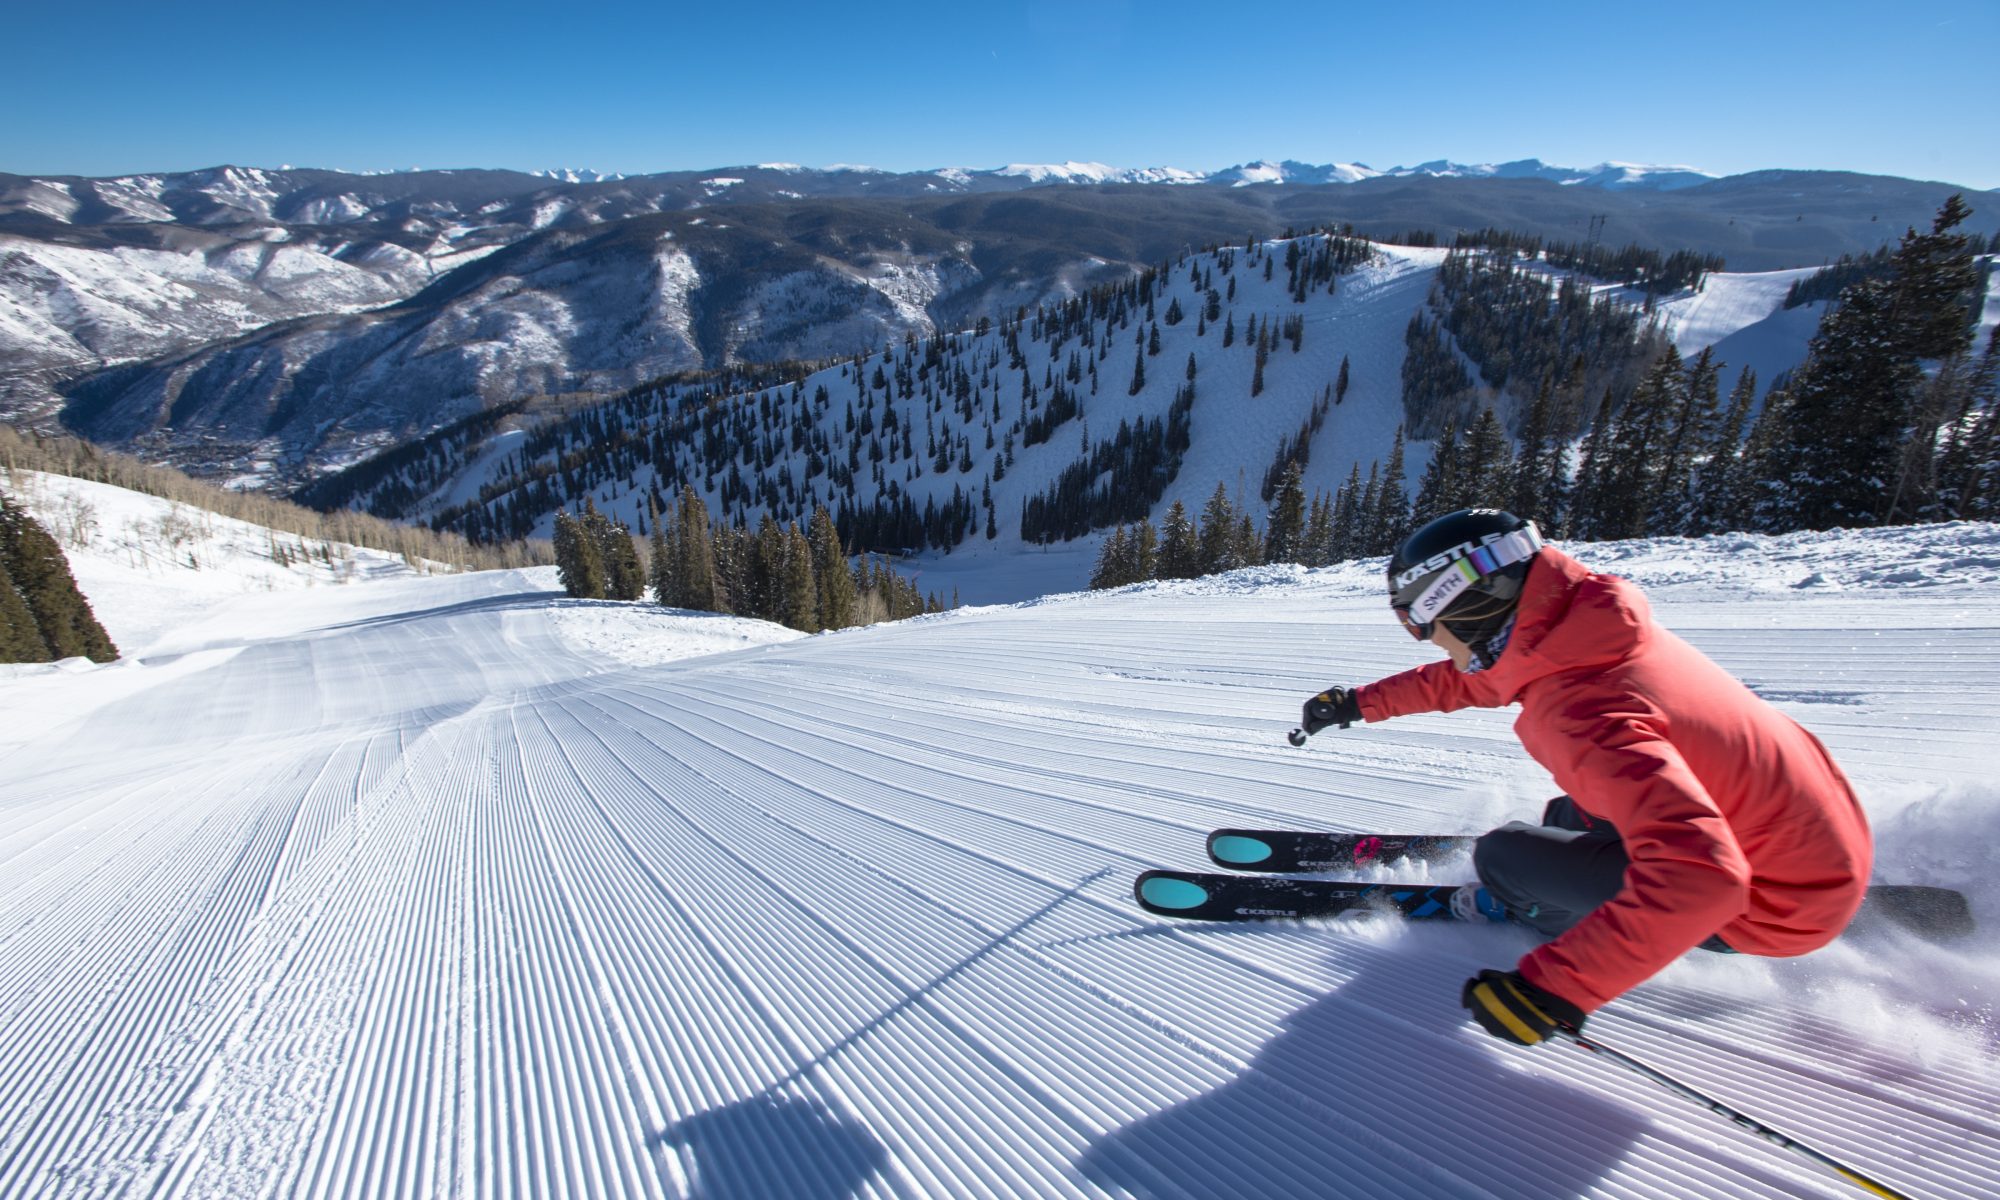 Darcy Conover skiing fresh corduroy down a steep snow covered groomed slope in the mountains at Aspen Mountain Ski Resort in Colorado - Aspen Mountain Announces Bonus Weekend June 1-2, 2019. Photo Aspen Snowmass.